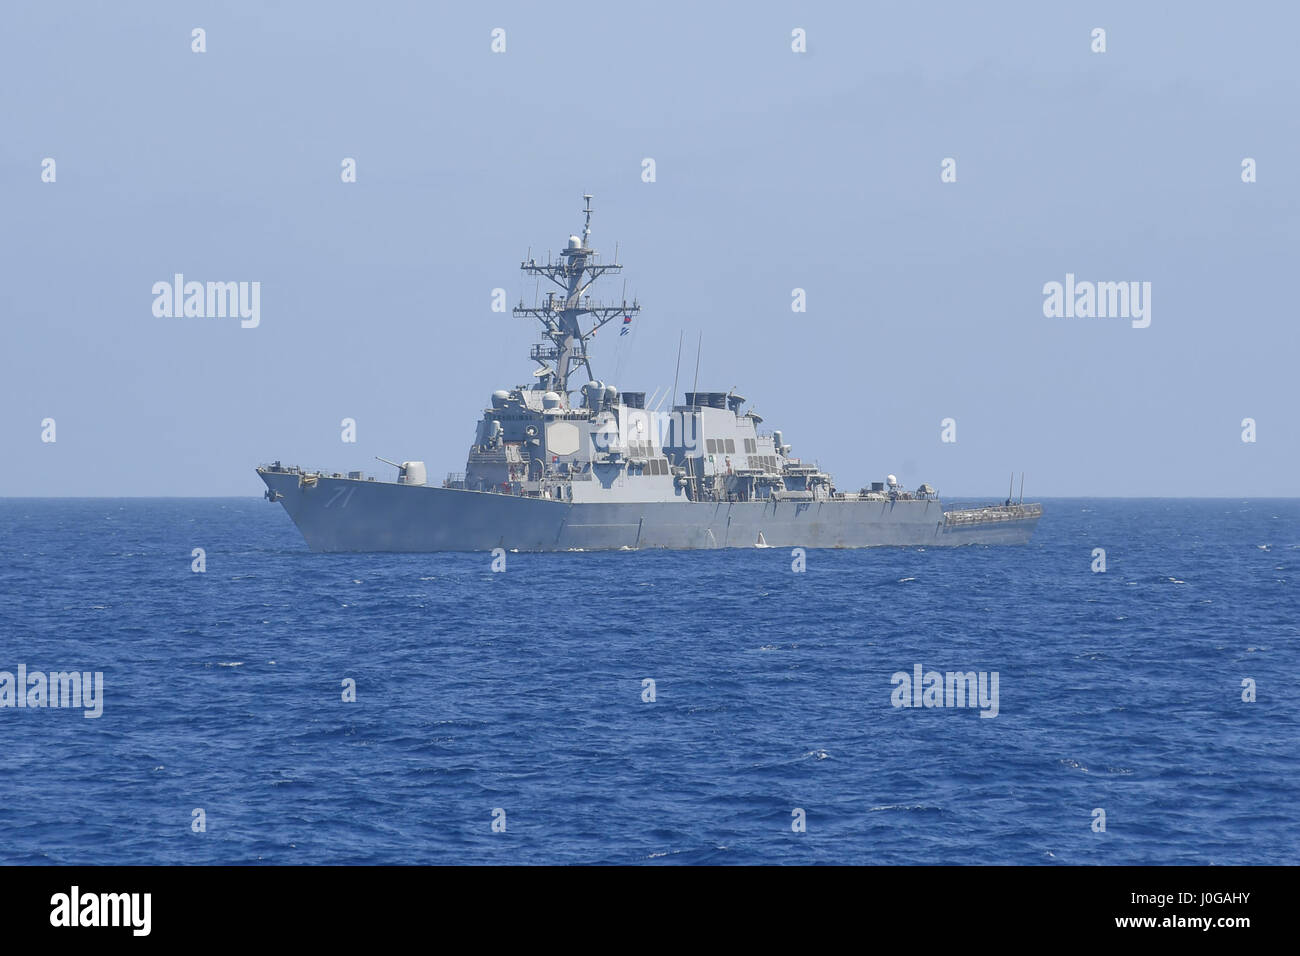 170407-N-JI086-384  MEDITERRANEAN SEA (April 7, 2017) The guided-missile destroyer USS Ross (DDG 71) transits the Mediterranean Sea, April 7, 2017. Ross, forward-deployed to Rota, Spain, is conducting naval operations in the U.S. 6th Fleet area of operations in support of U.S. national security interests in Europe. (U.S. Navy photo by Mass Communication Specialist 3rd Class Ford Williams/Released) Stock Photo